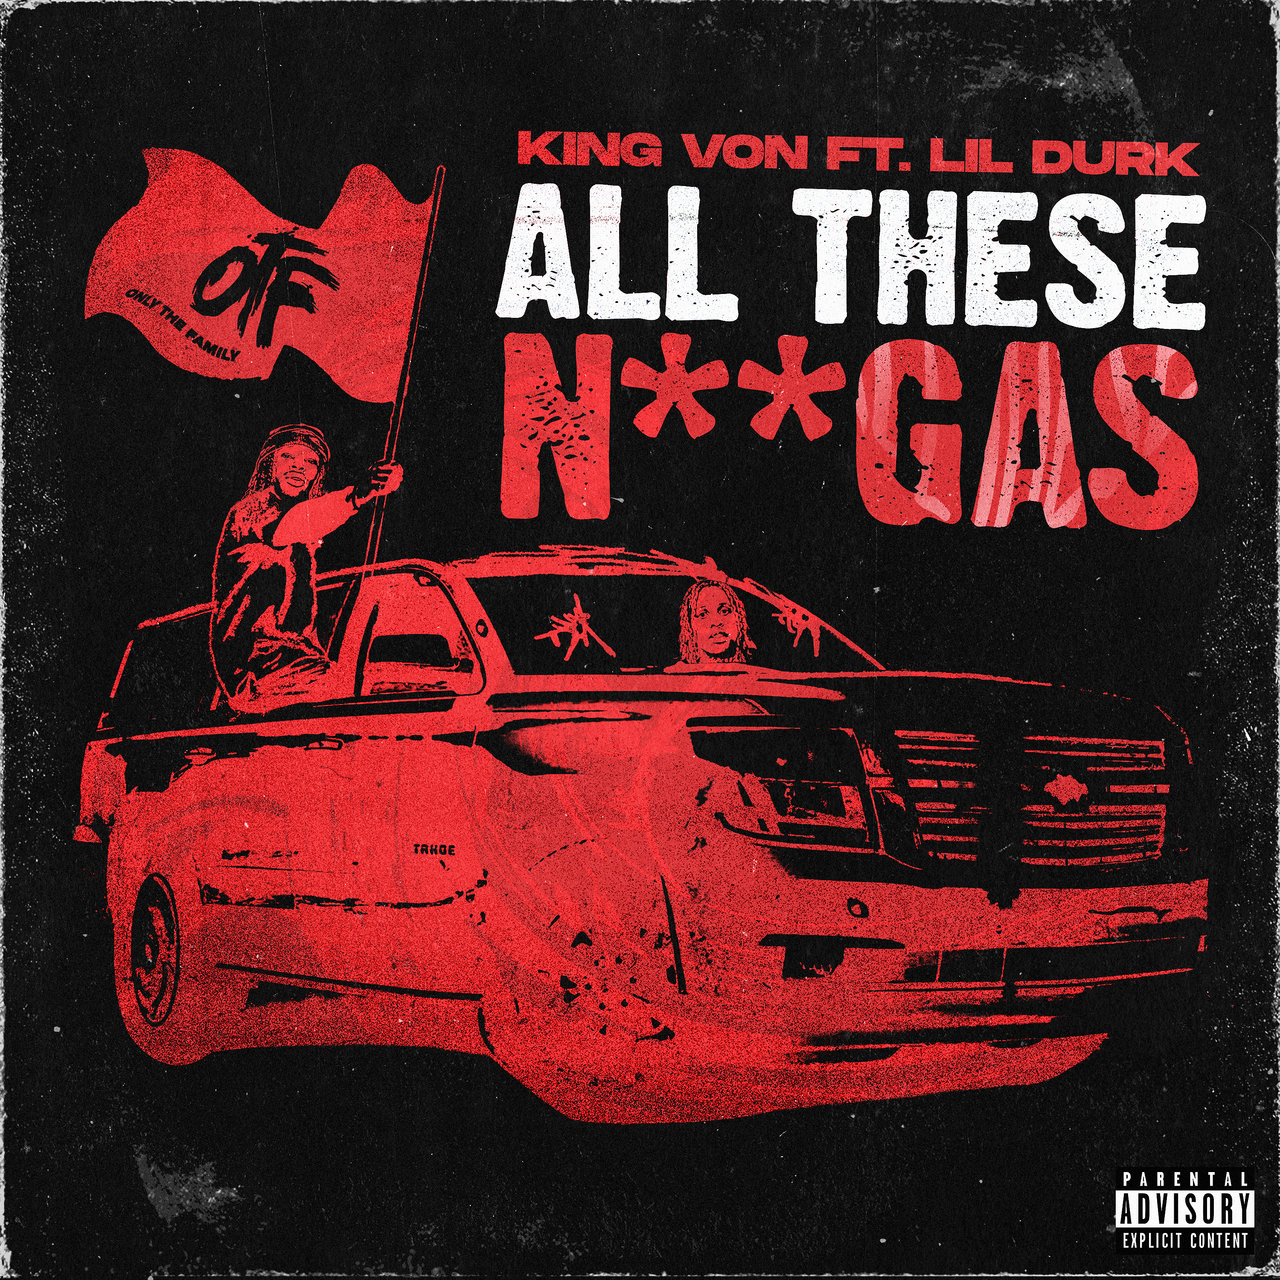 King Von - All These Niggas (ft. Lil Durk) (Cover)